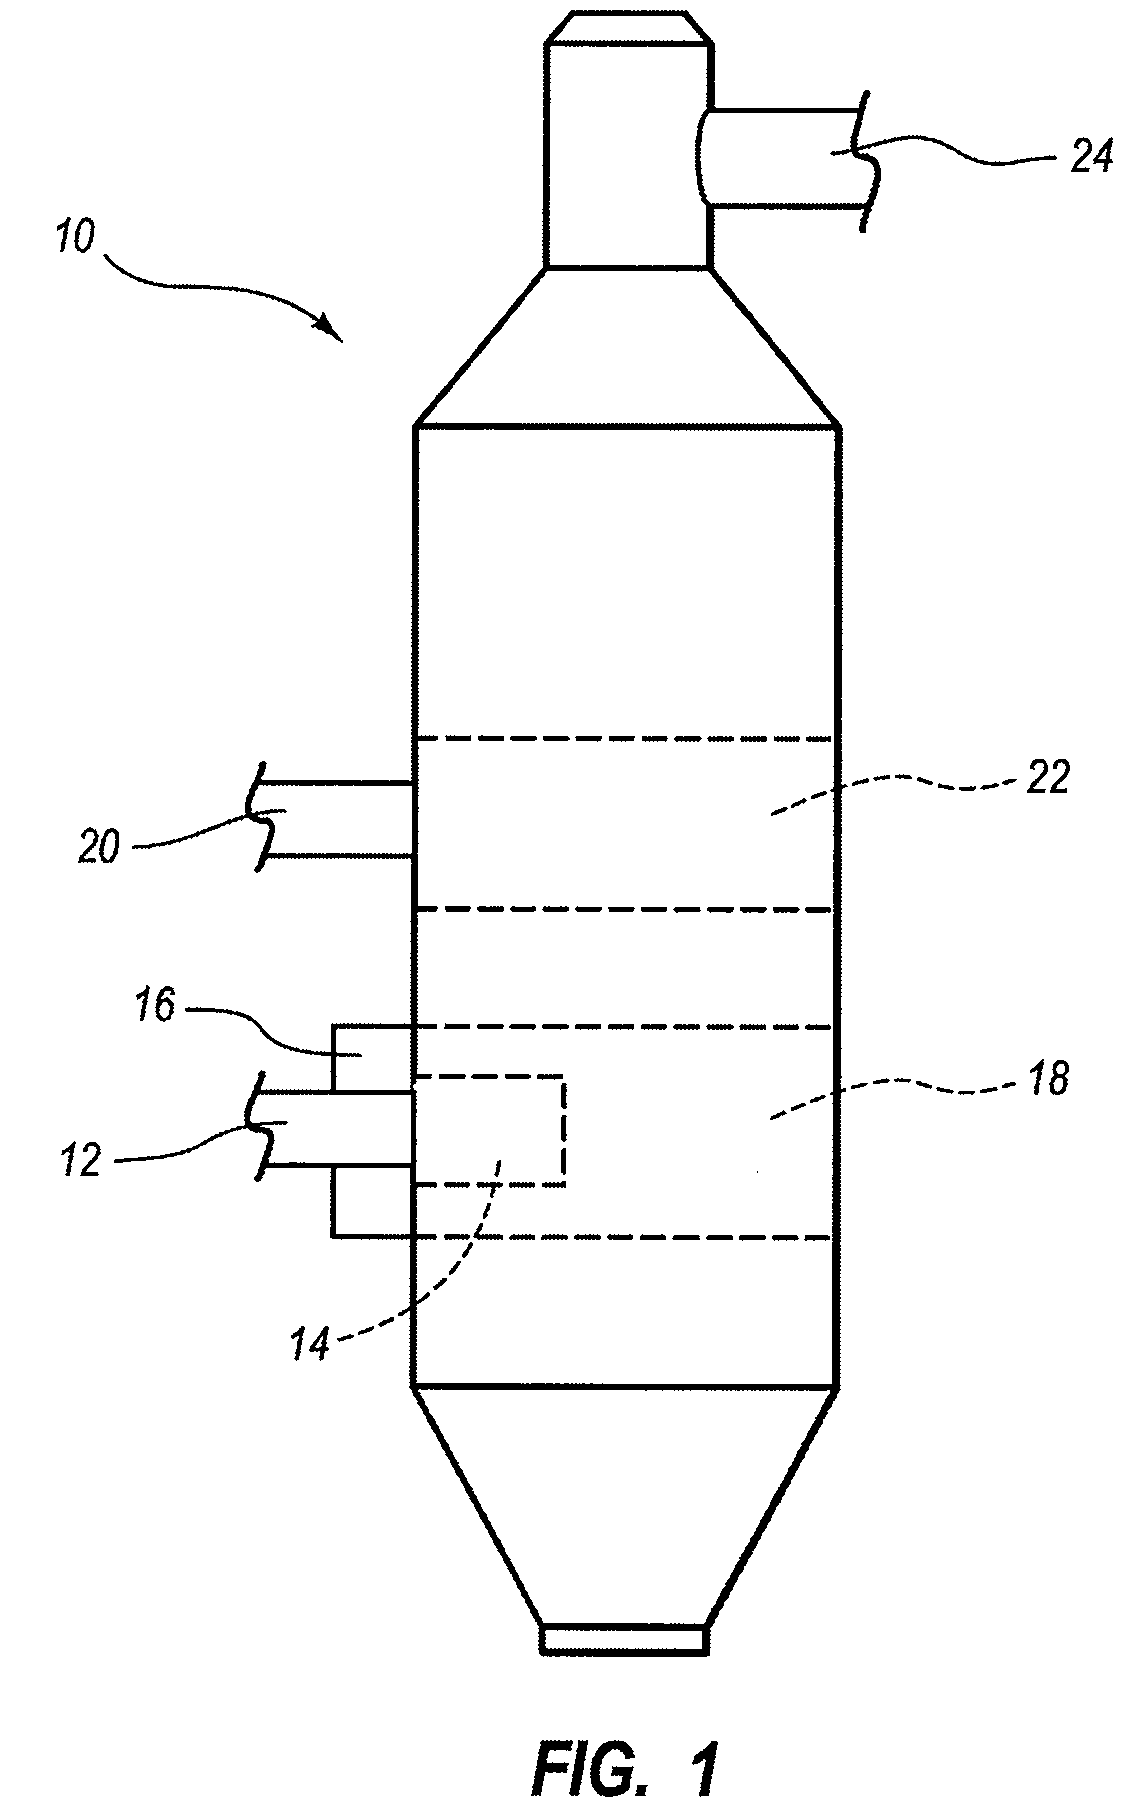 METHOD FOR REDUCING NOx DURING COMBUSTION OF COAL IN A BURNER BY OPTIMIZING COMBUSTION AIR FLOW